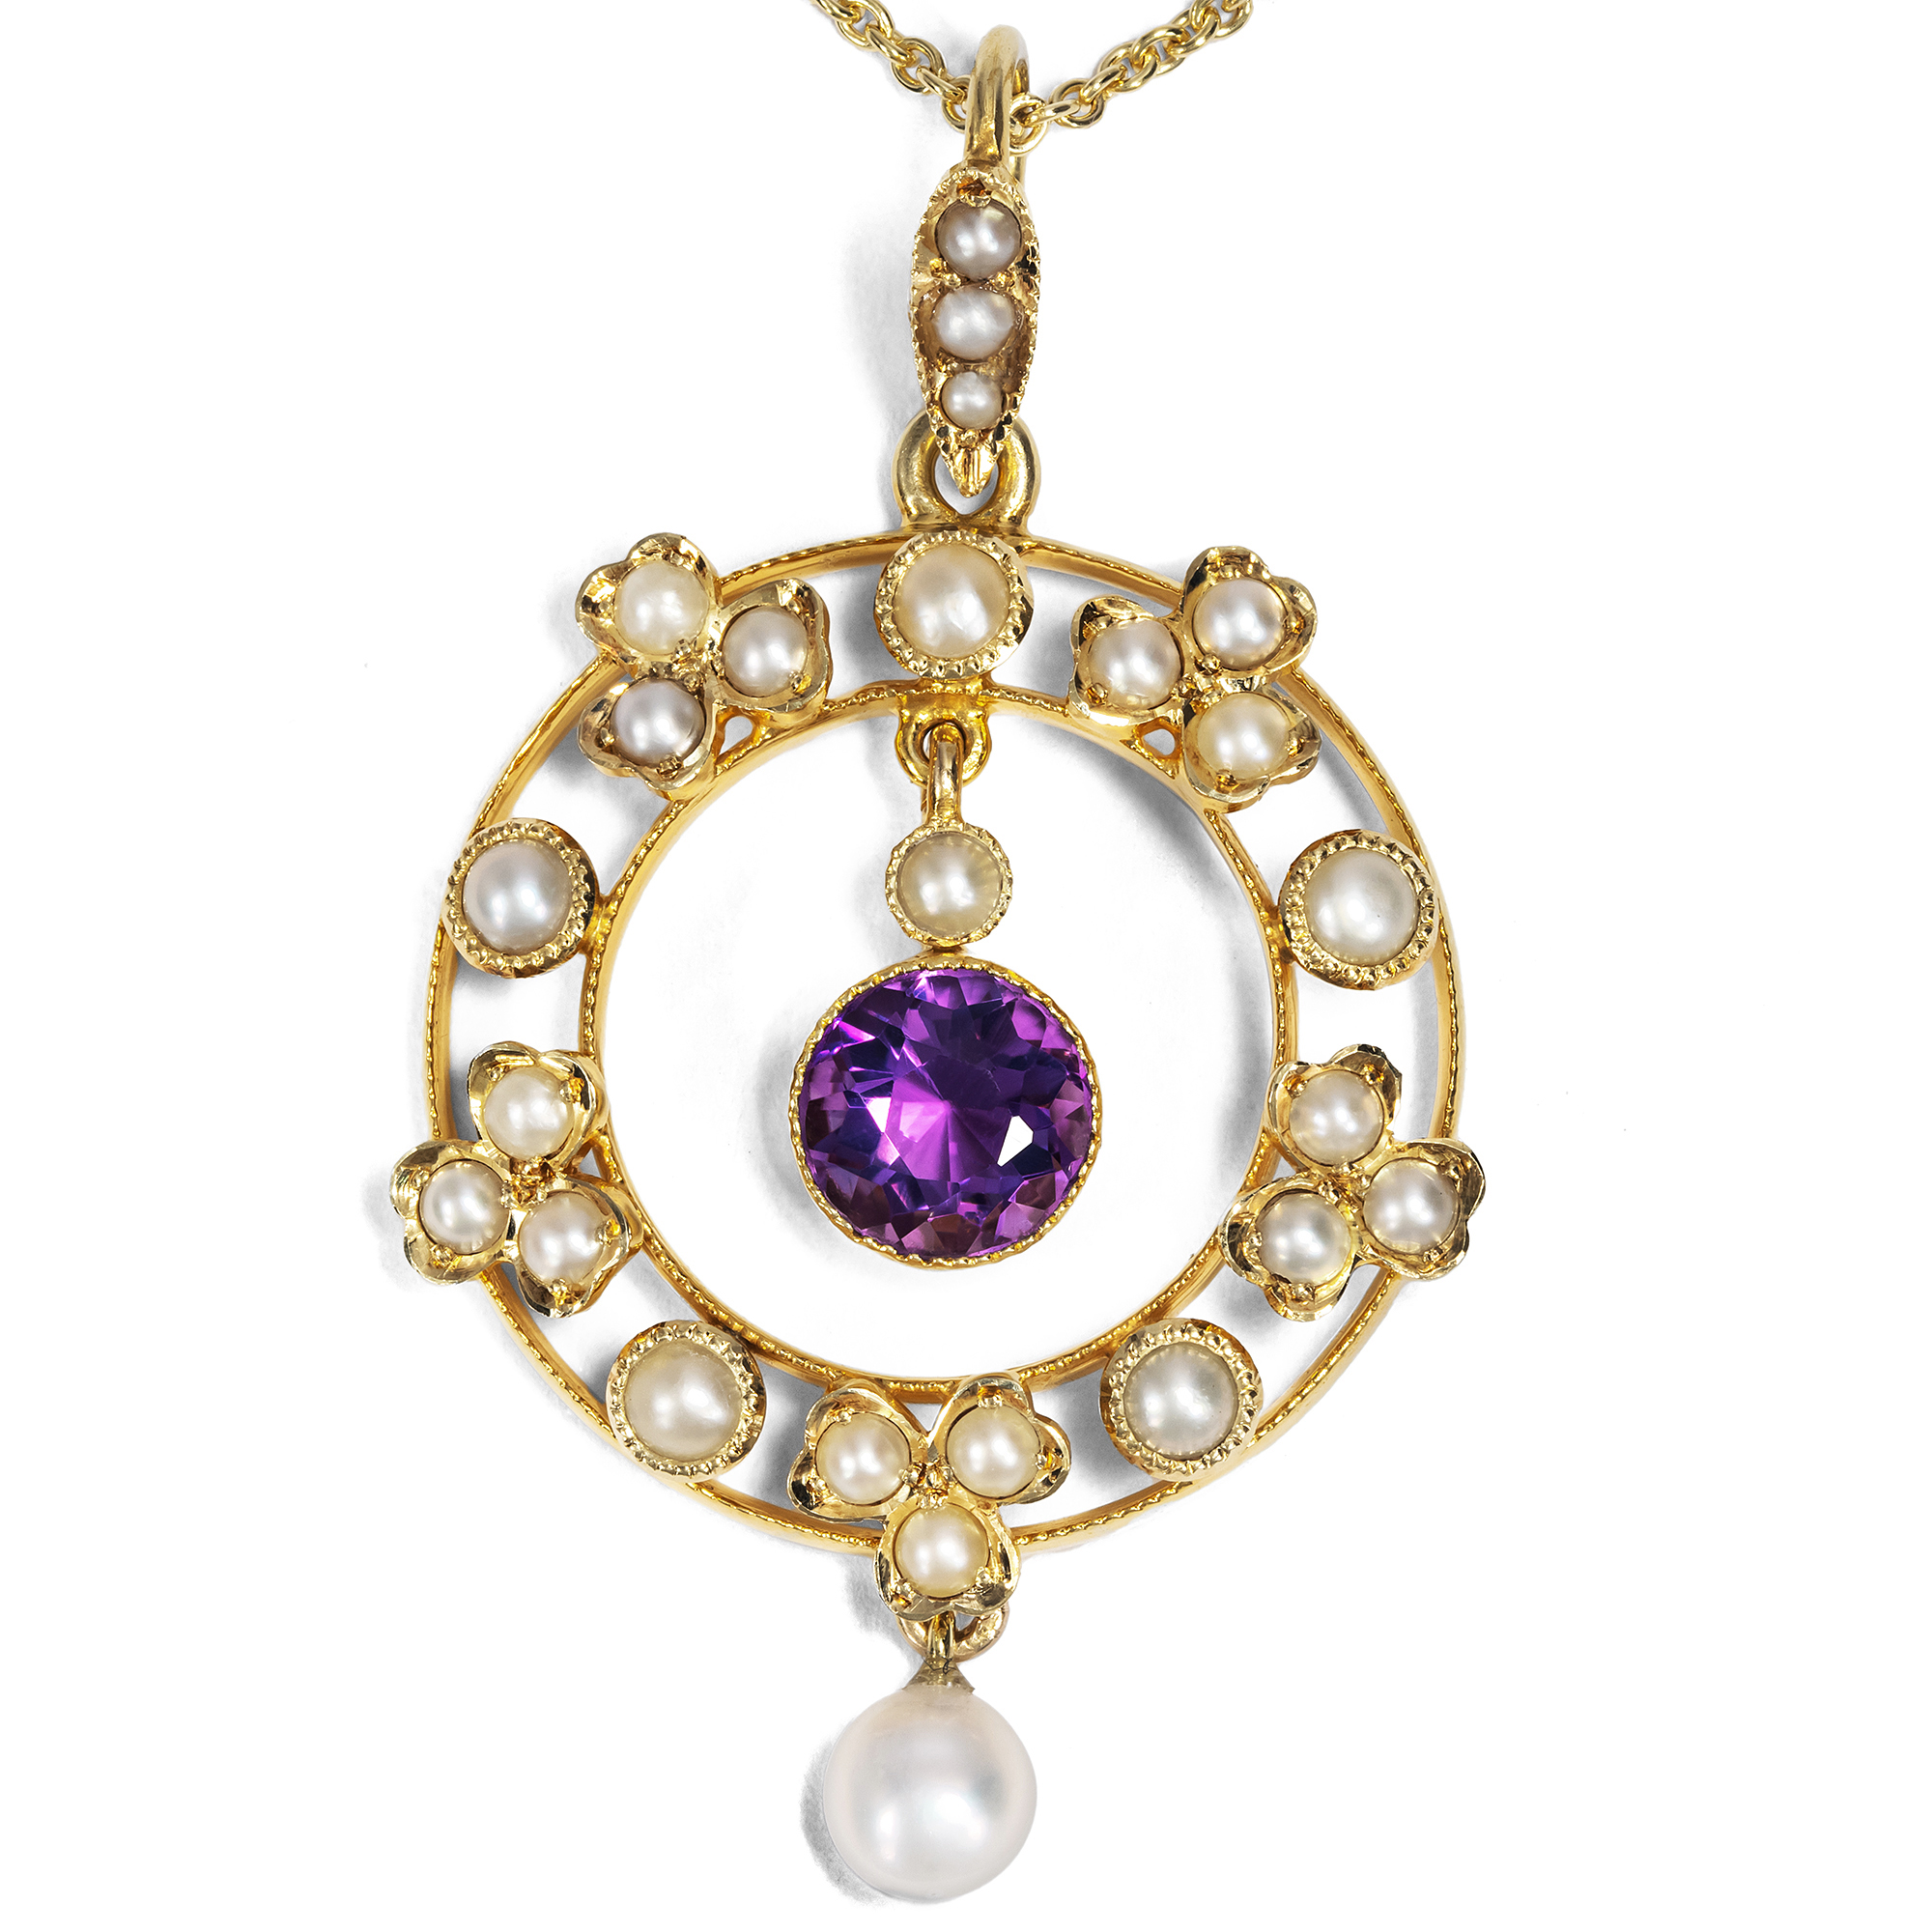 Antique Amethyst & Seed Pearl Pendant in Gold, Britain, c. 1905